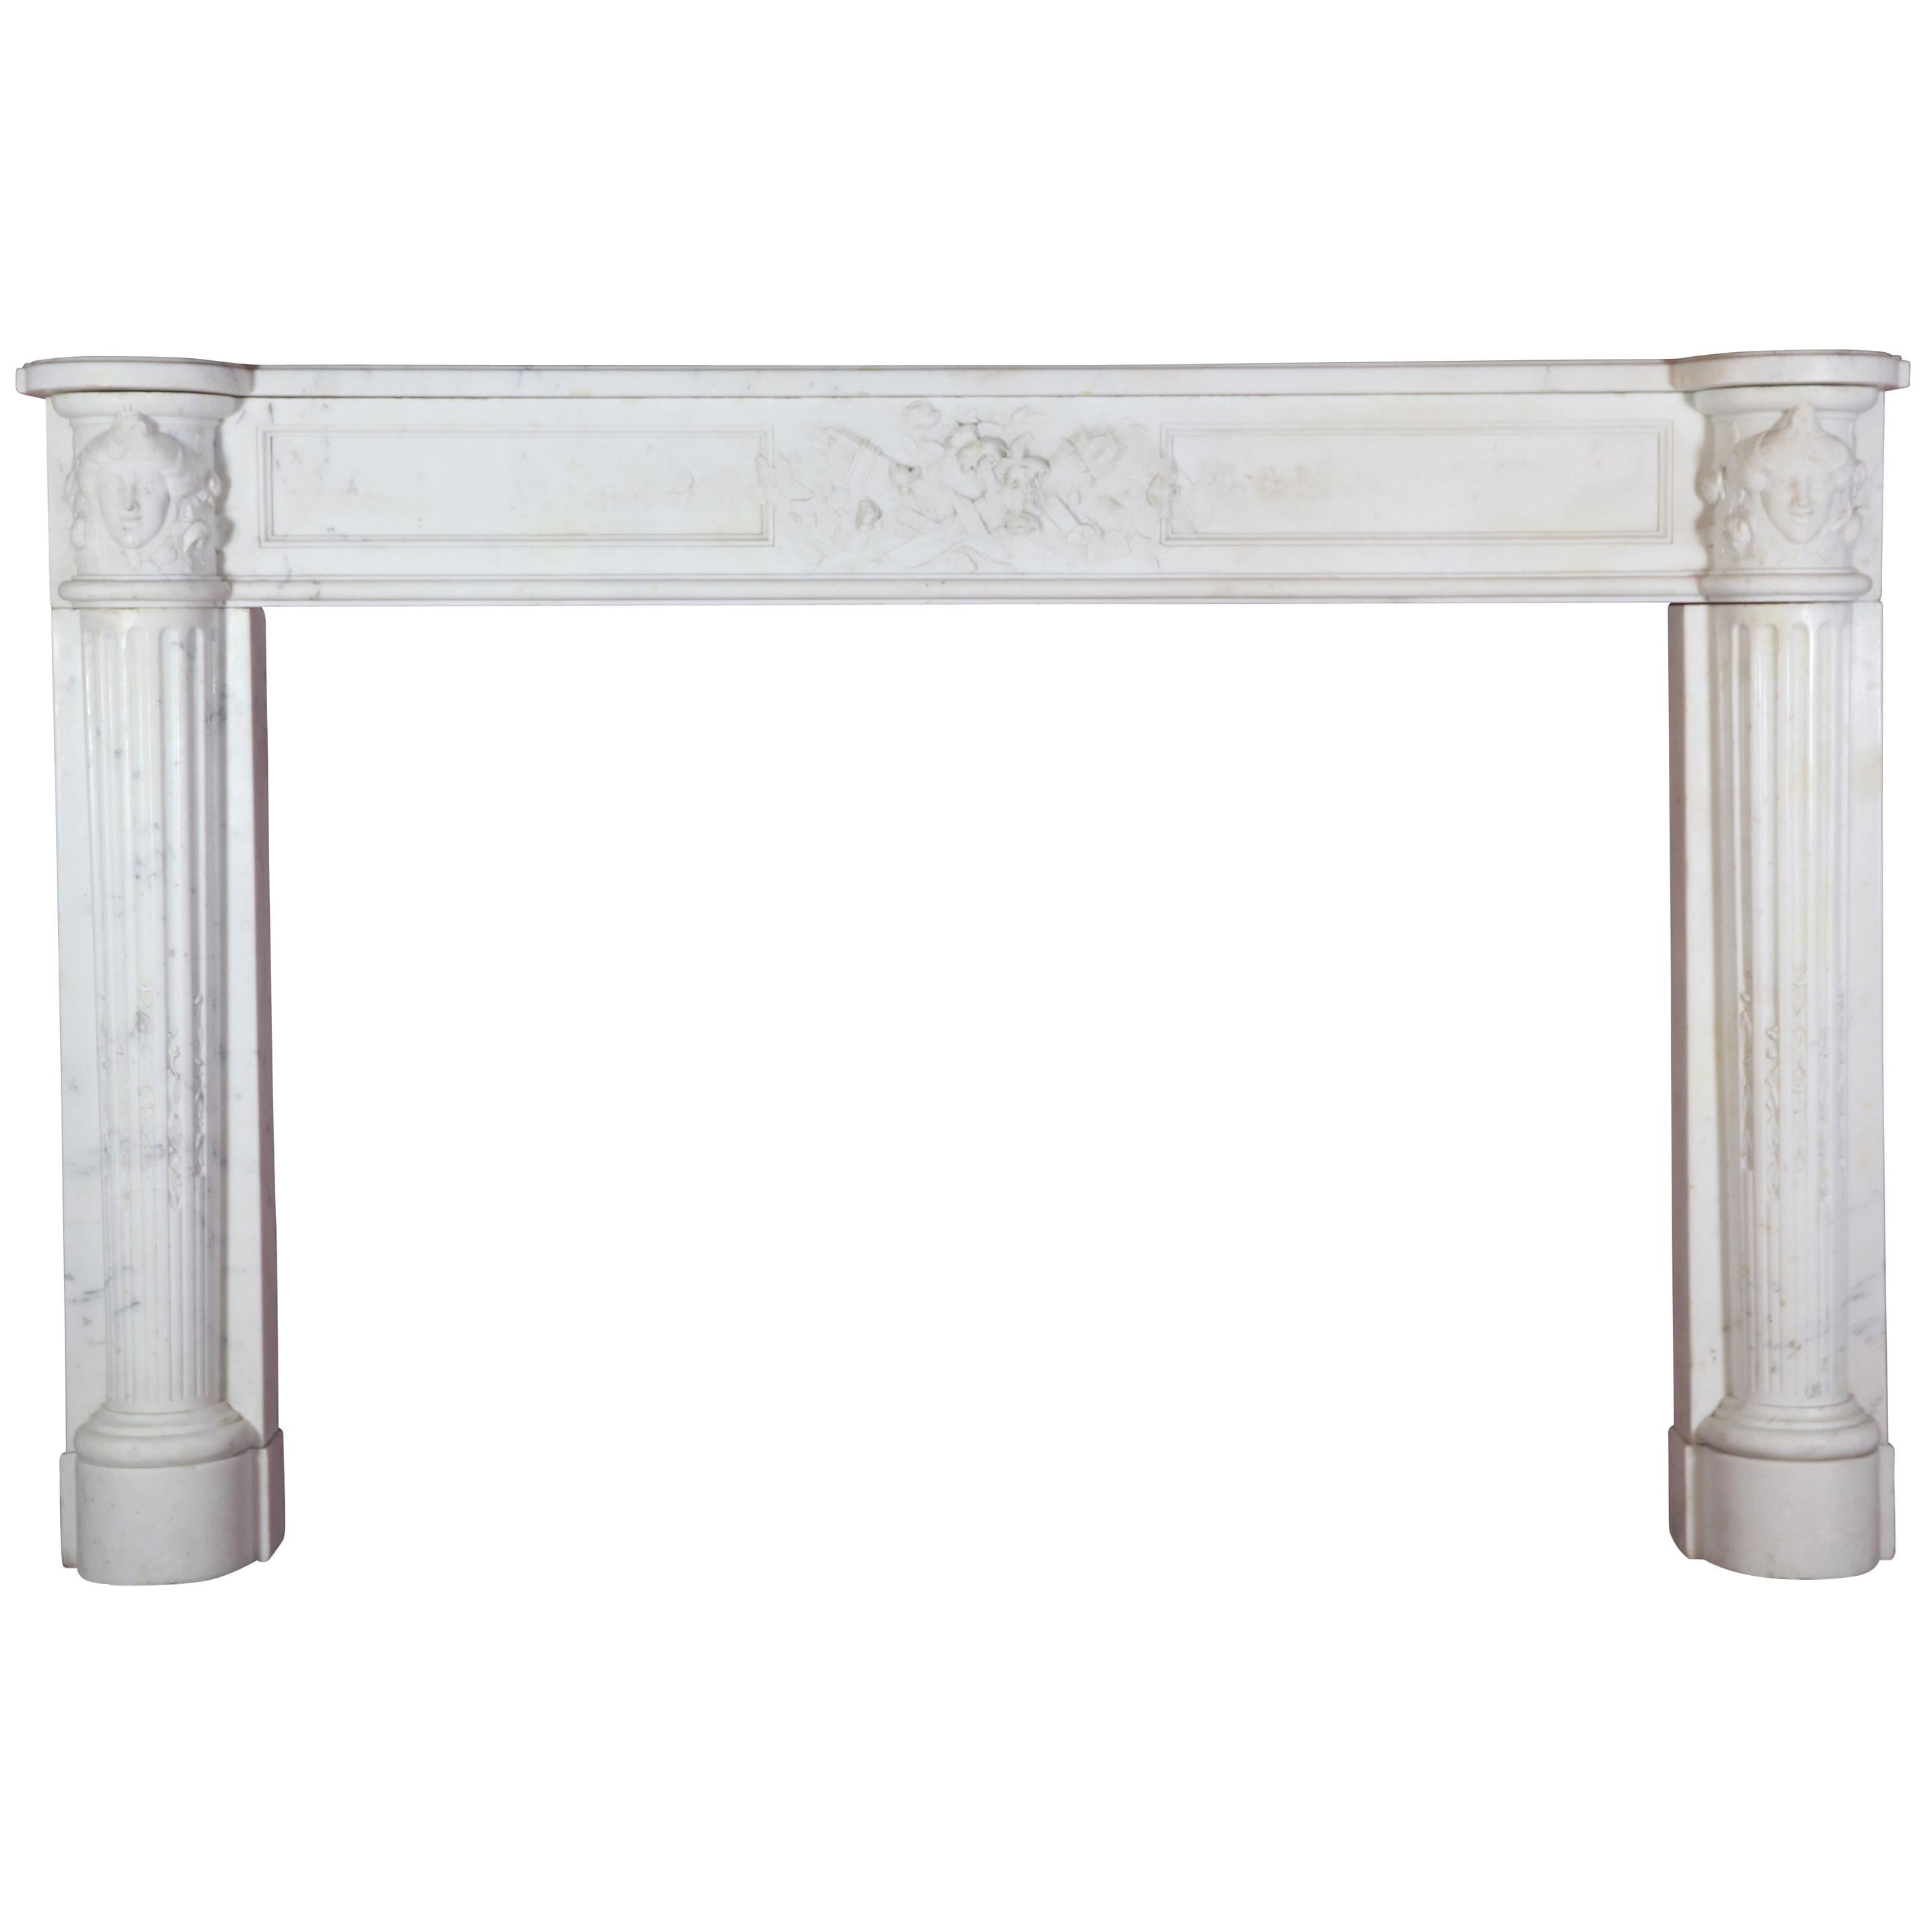 Fine French White 18th Century Carrara Marble Antique Fireplace Surround For Sale